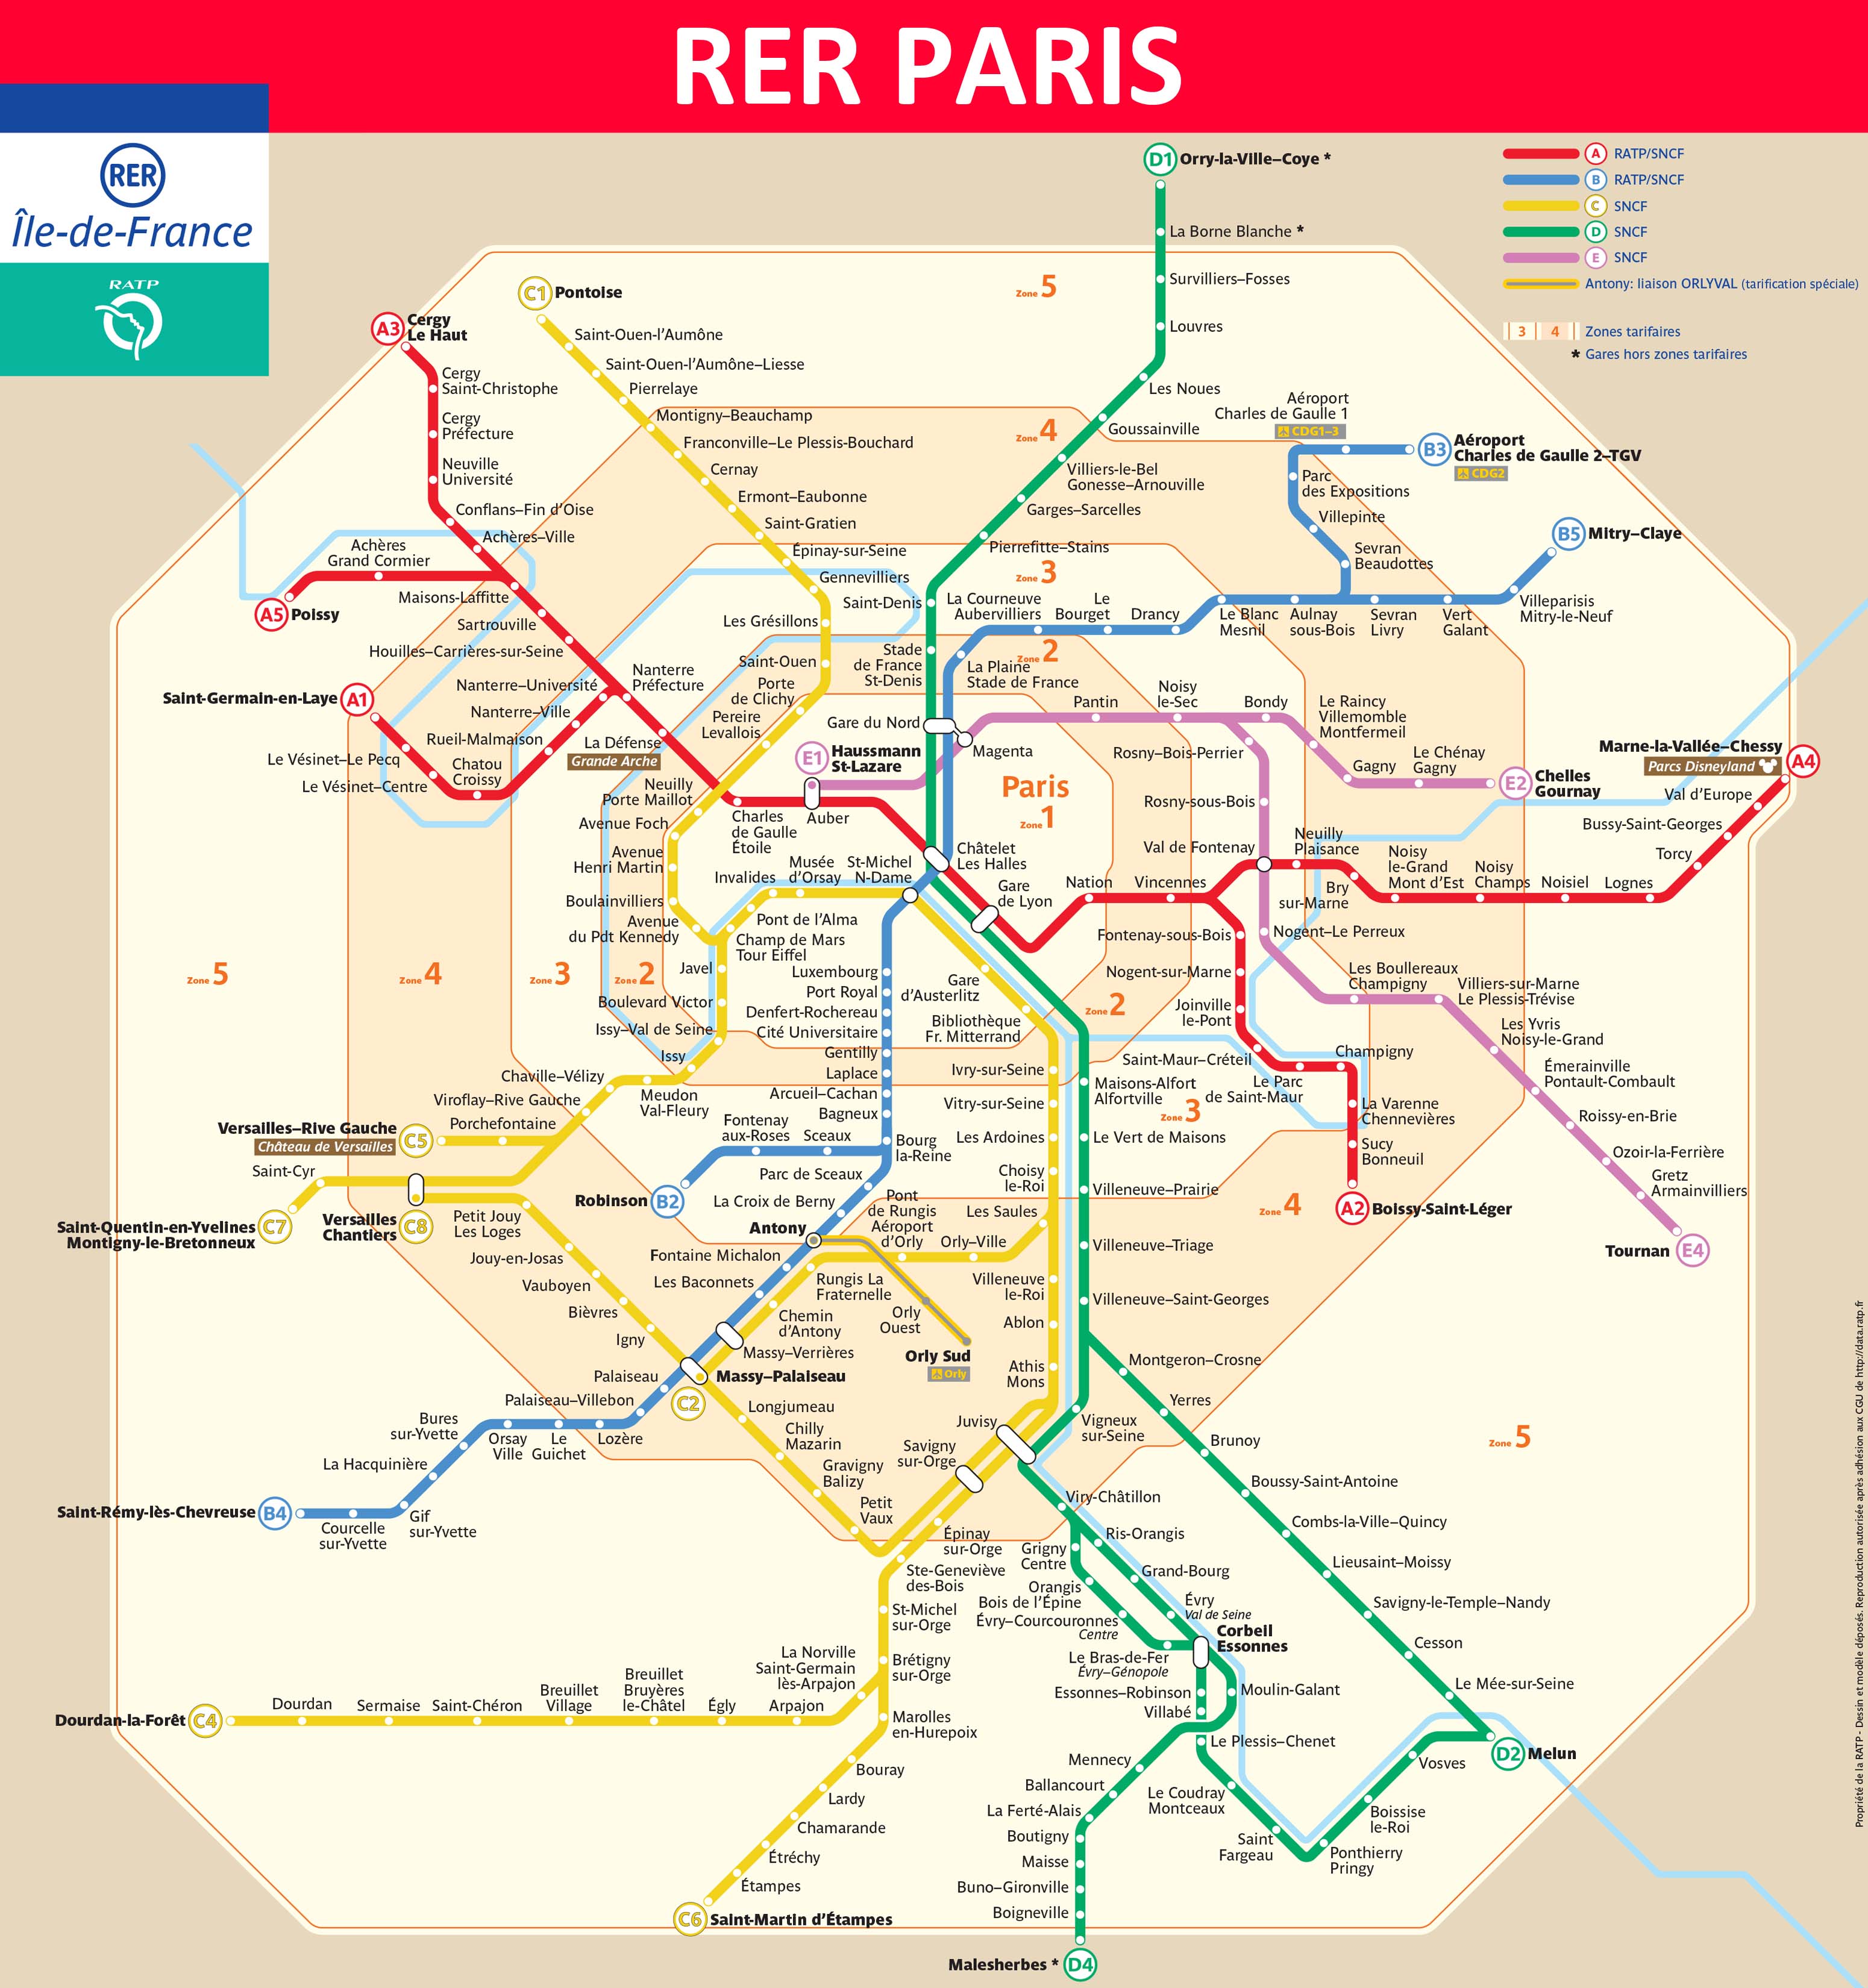 How To Read Paris Metro Map United States Map